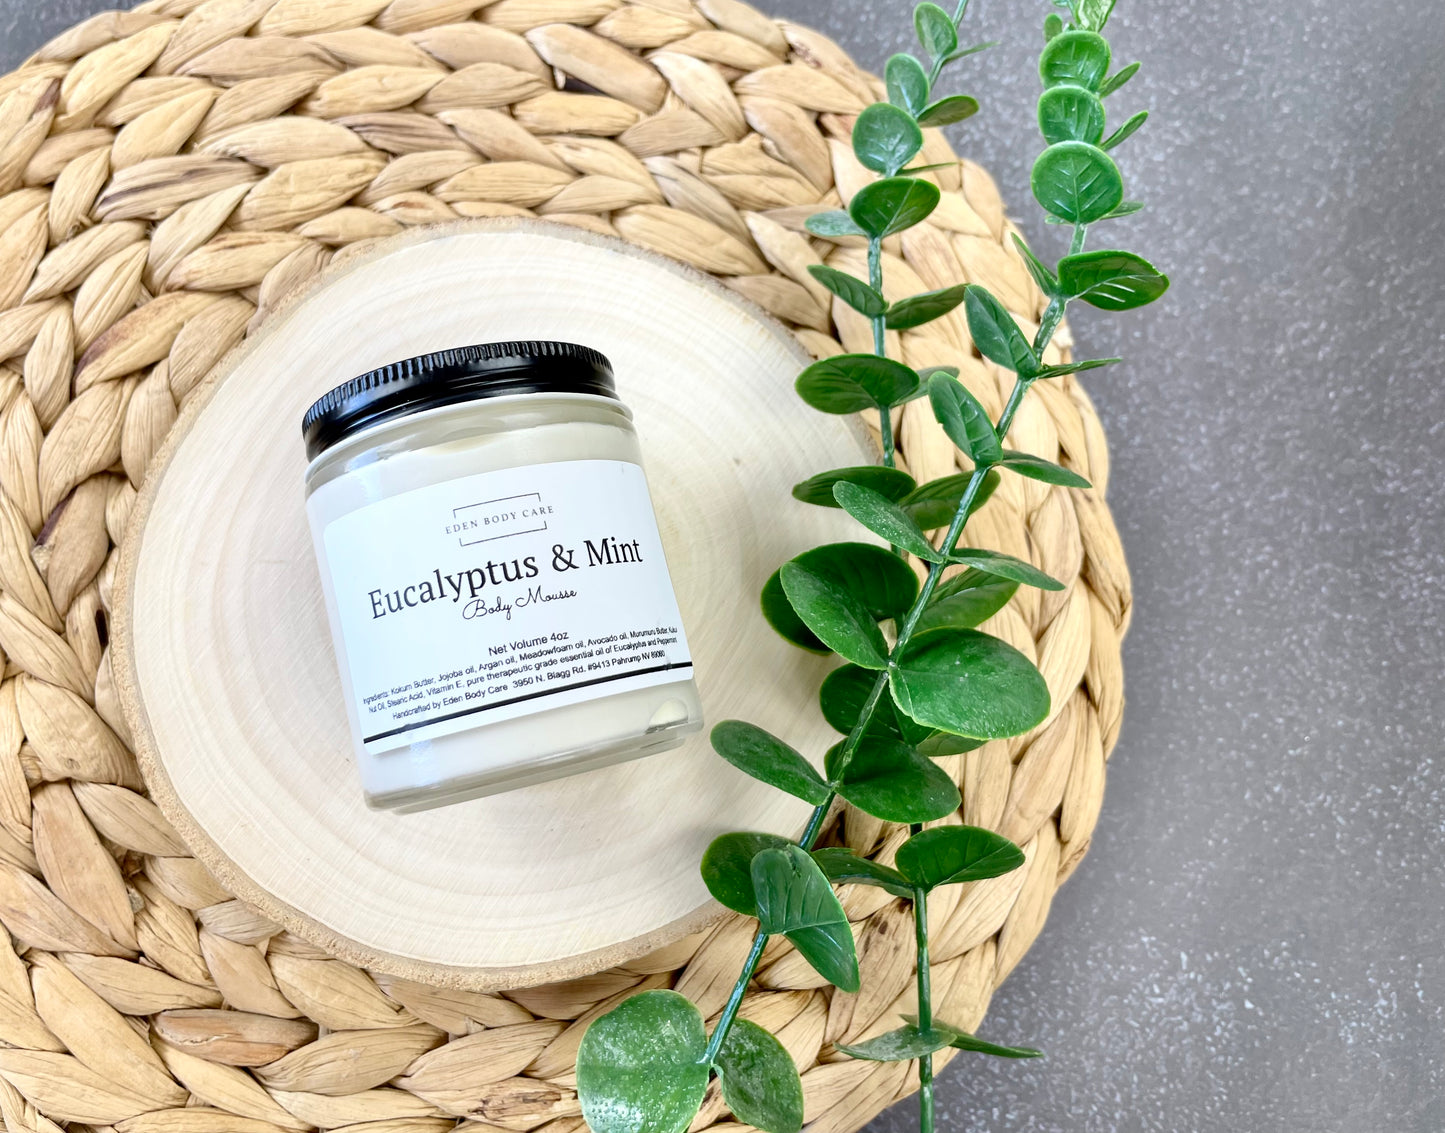 Eucalyptus and Mint whipped body butter